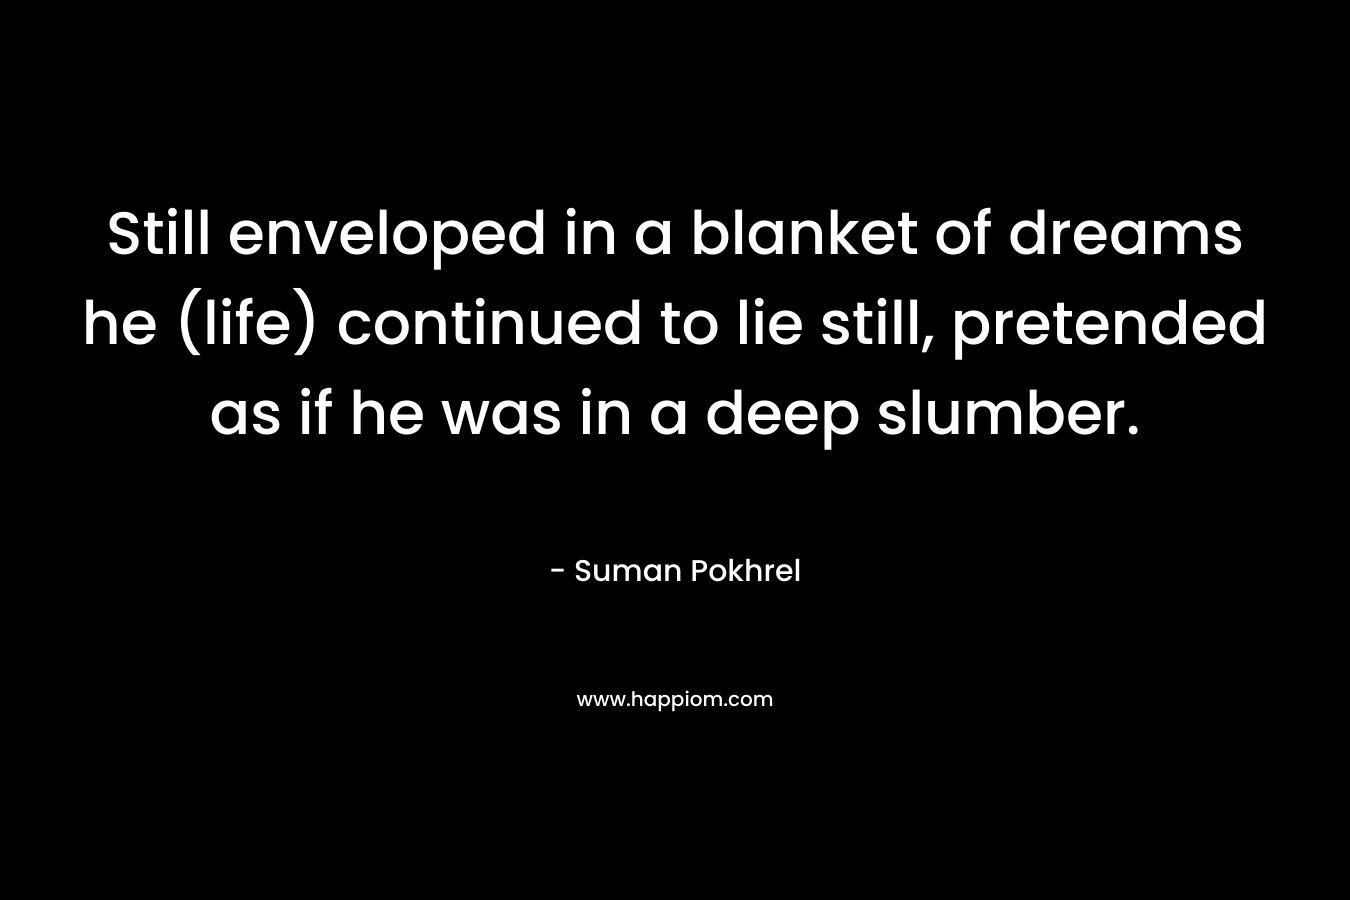 Still enveloped in a blanket of dreams he (life) continued to lie still, pretended as if he was in a deep slumber.